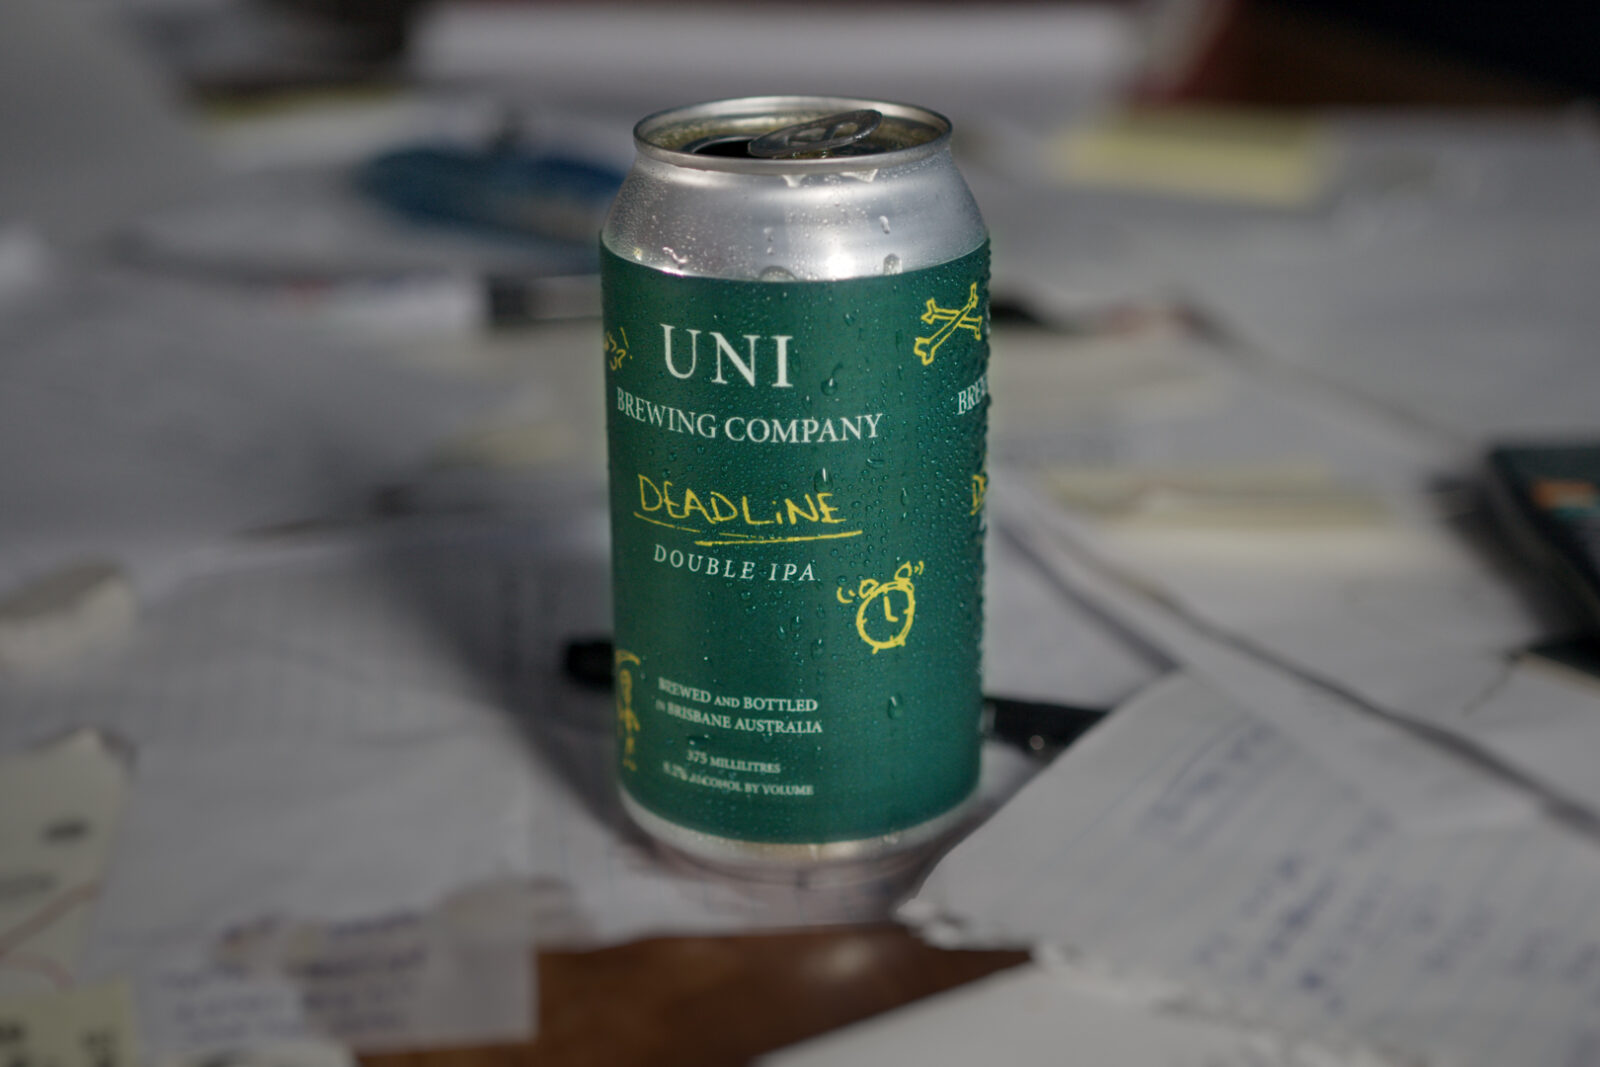 Uni Brewing Company Deadline Double IPA beer can on a desk.